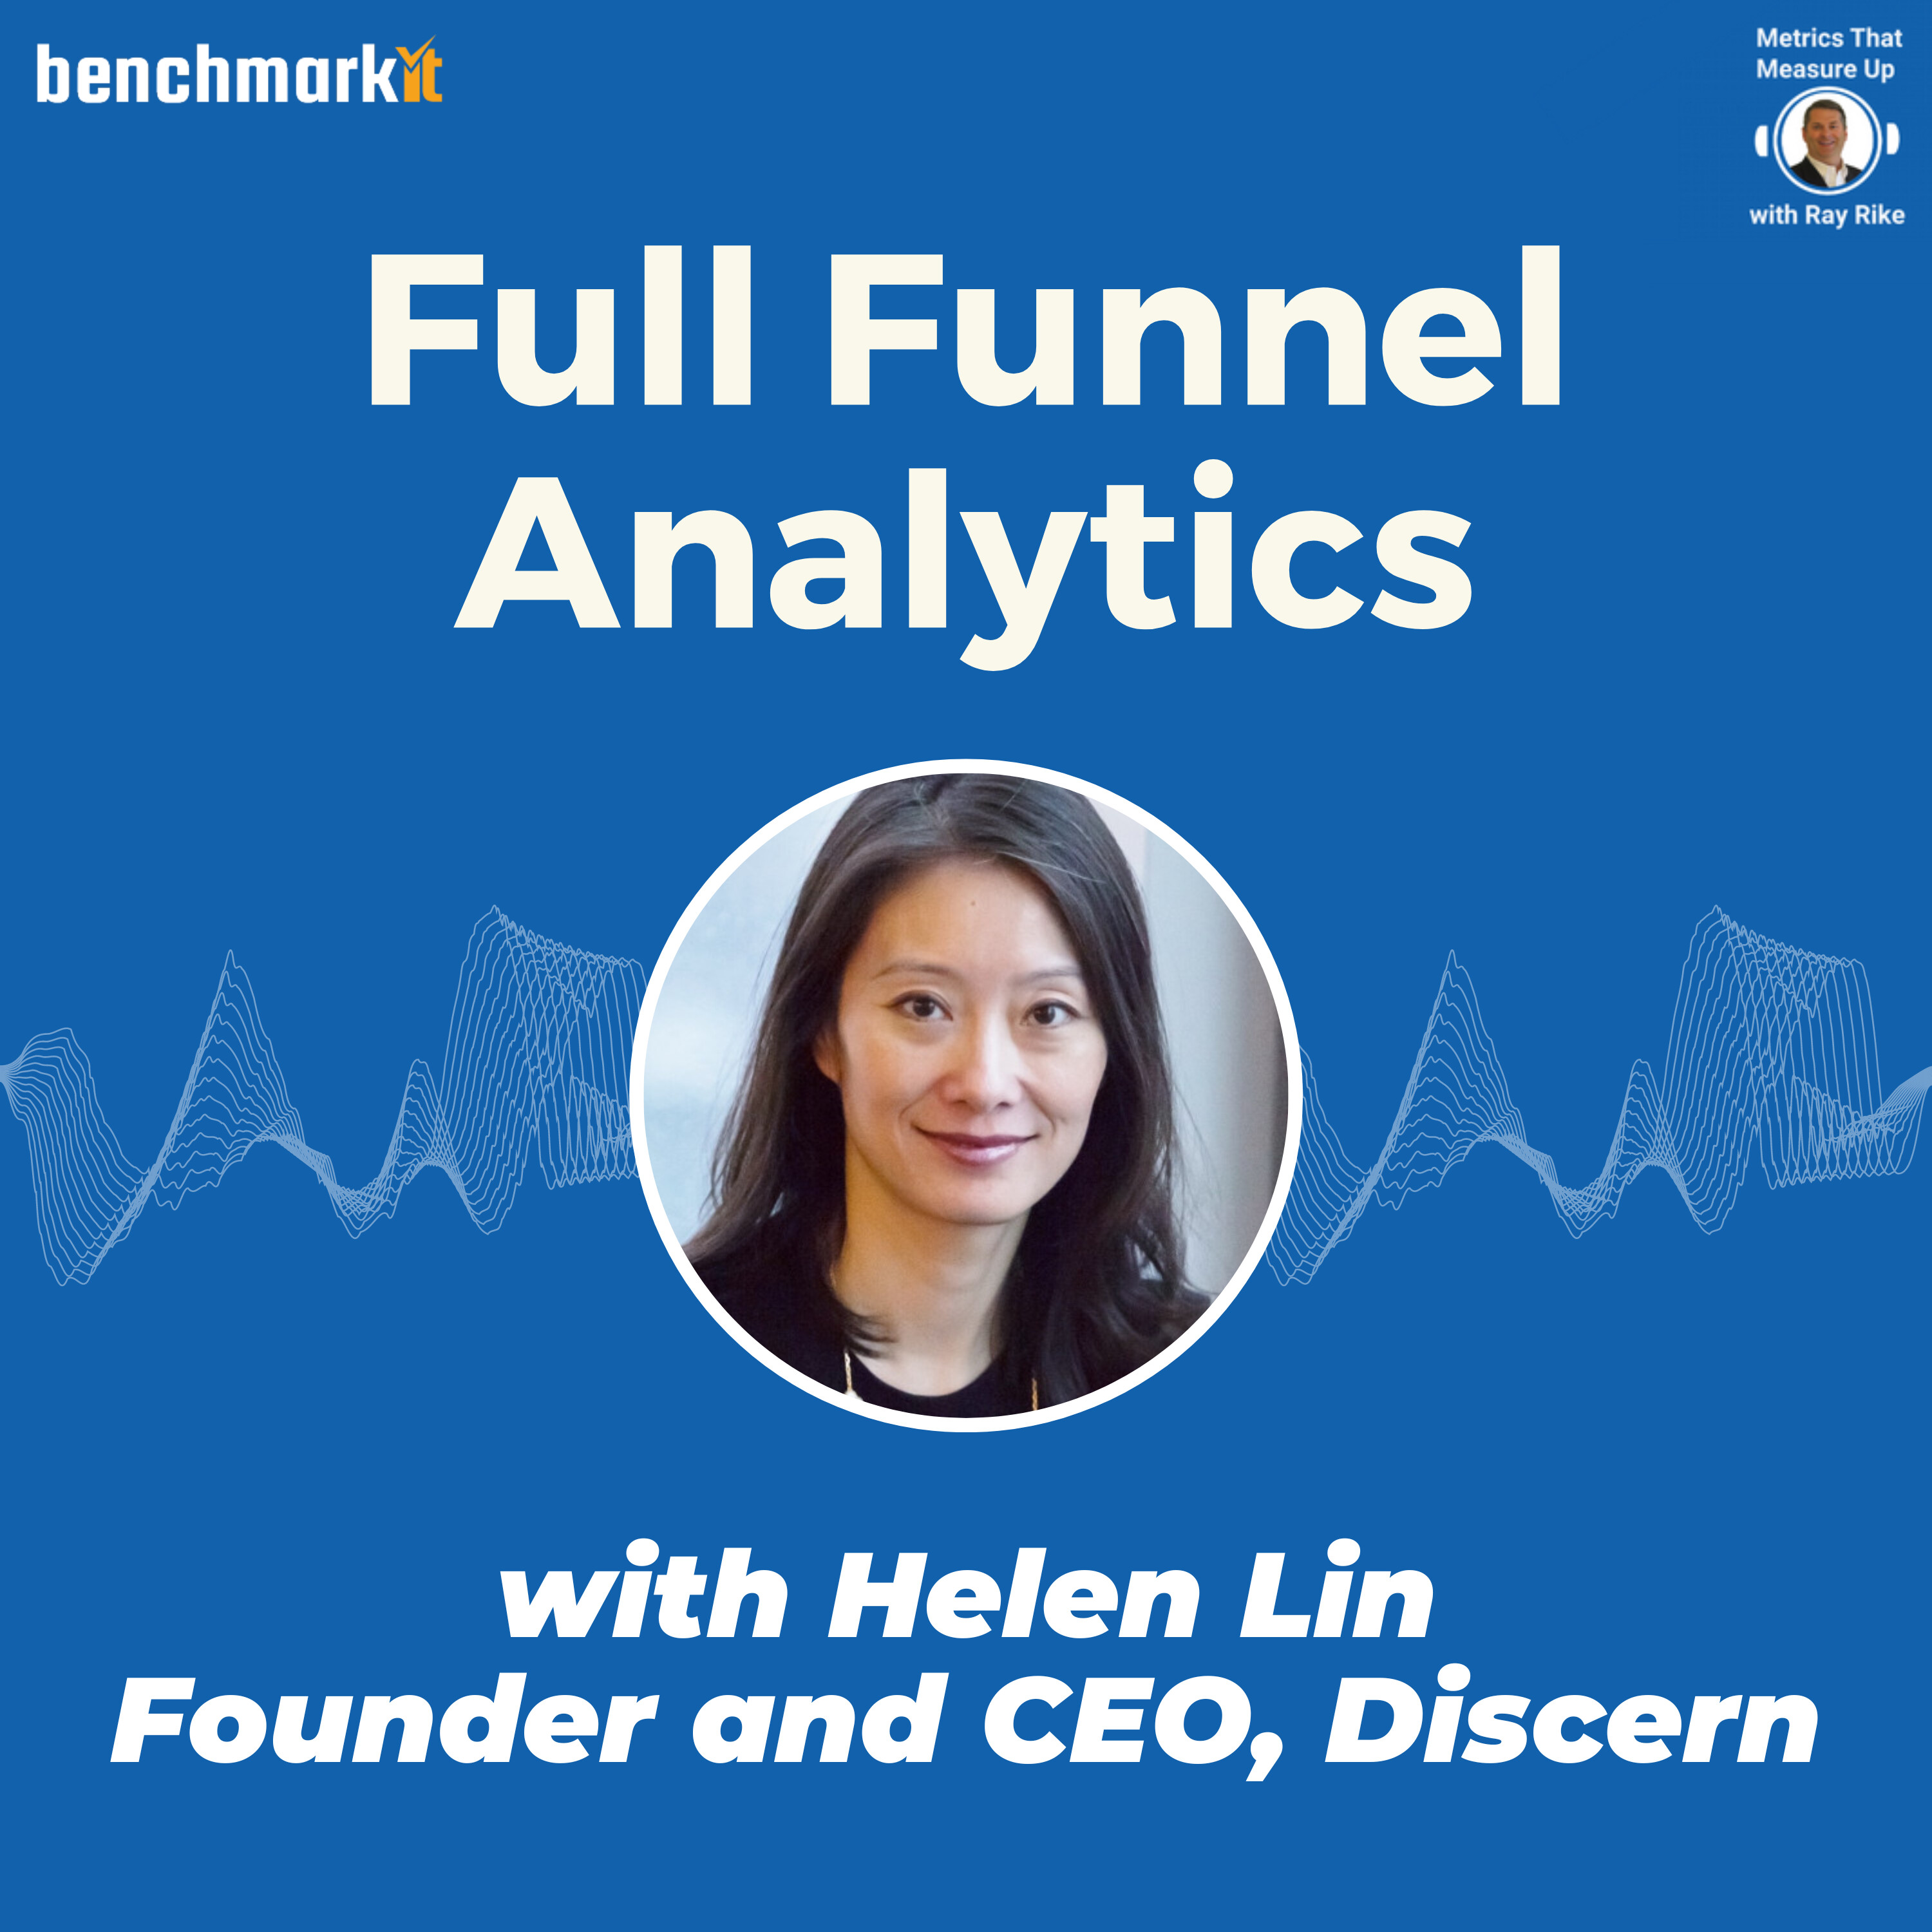 Full Funnel Analytics with Helen Lin, Founder and CEO Discern.io